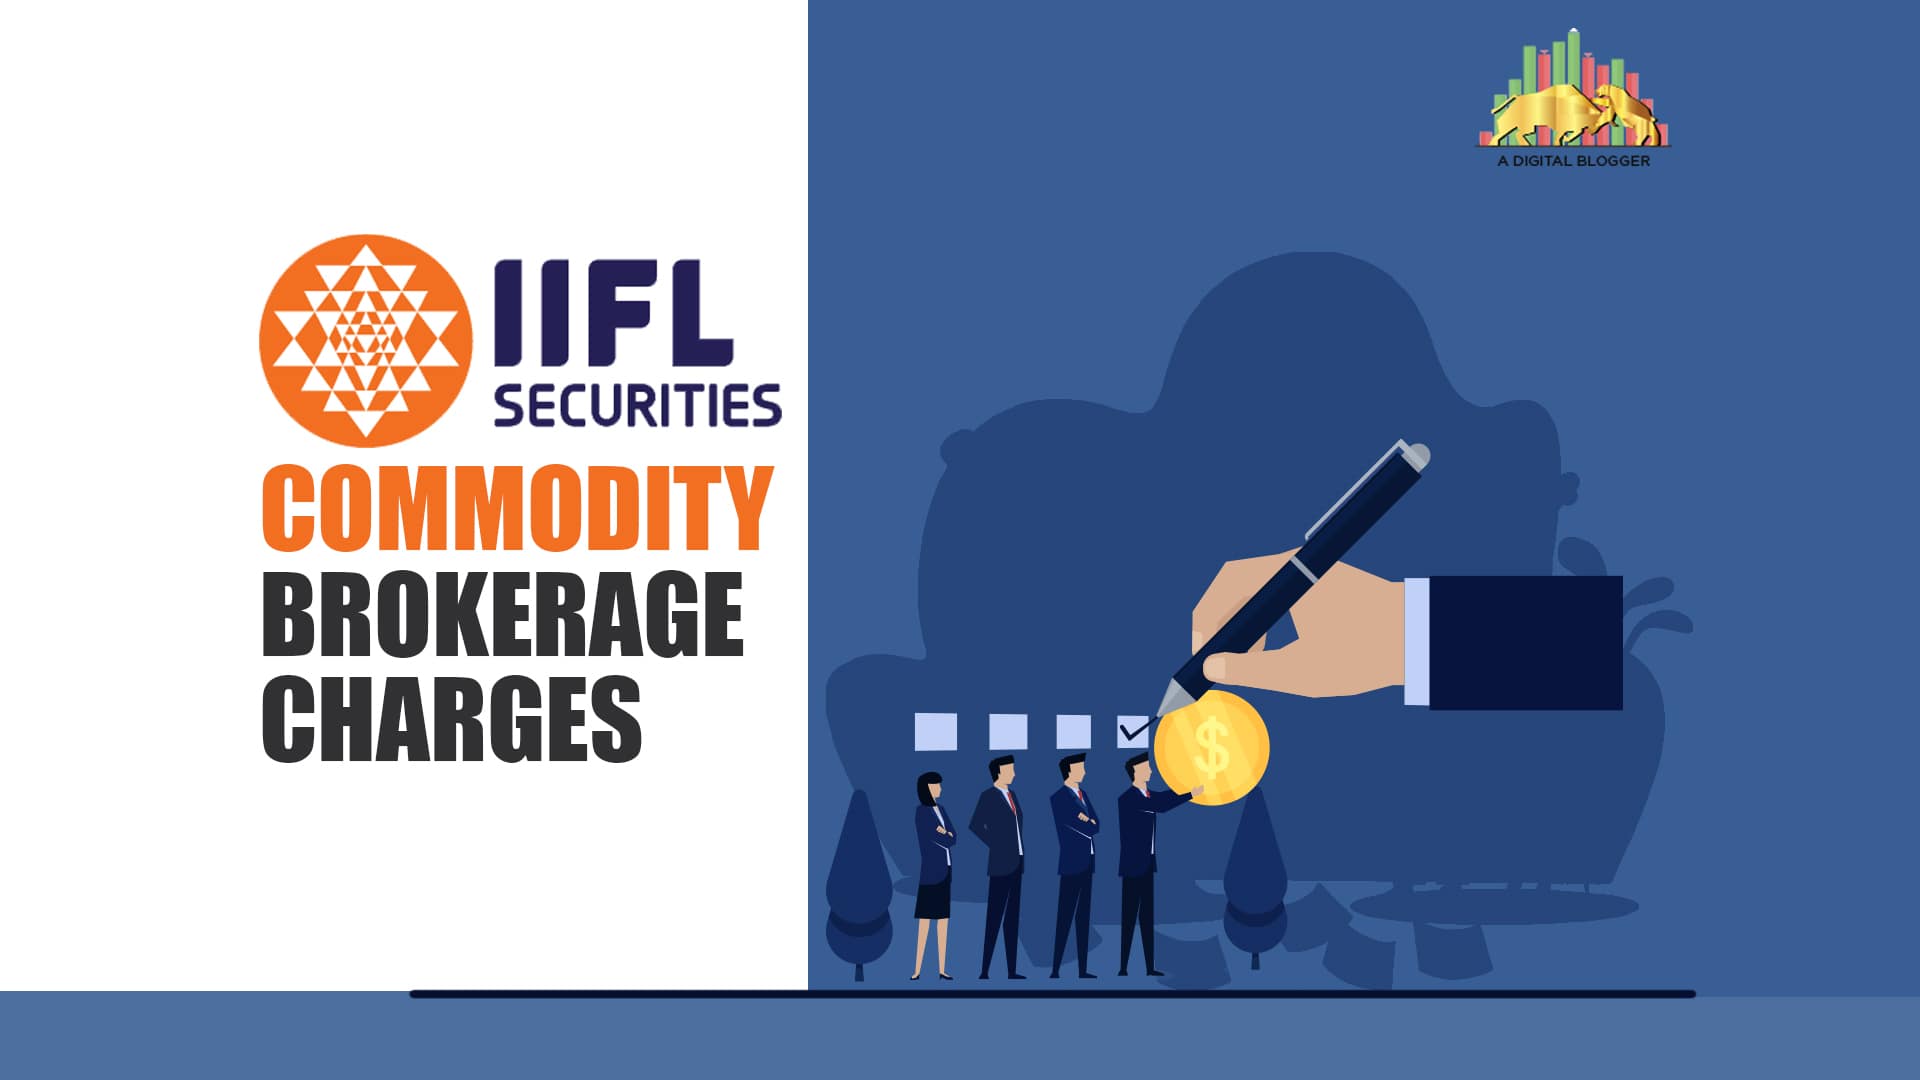 IIFL Commodity Brokerage Charges | Trading, Futures, Options